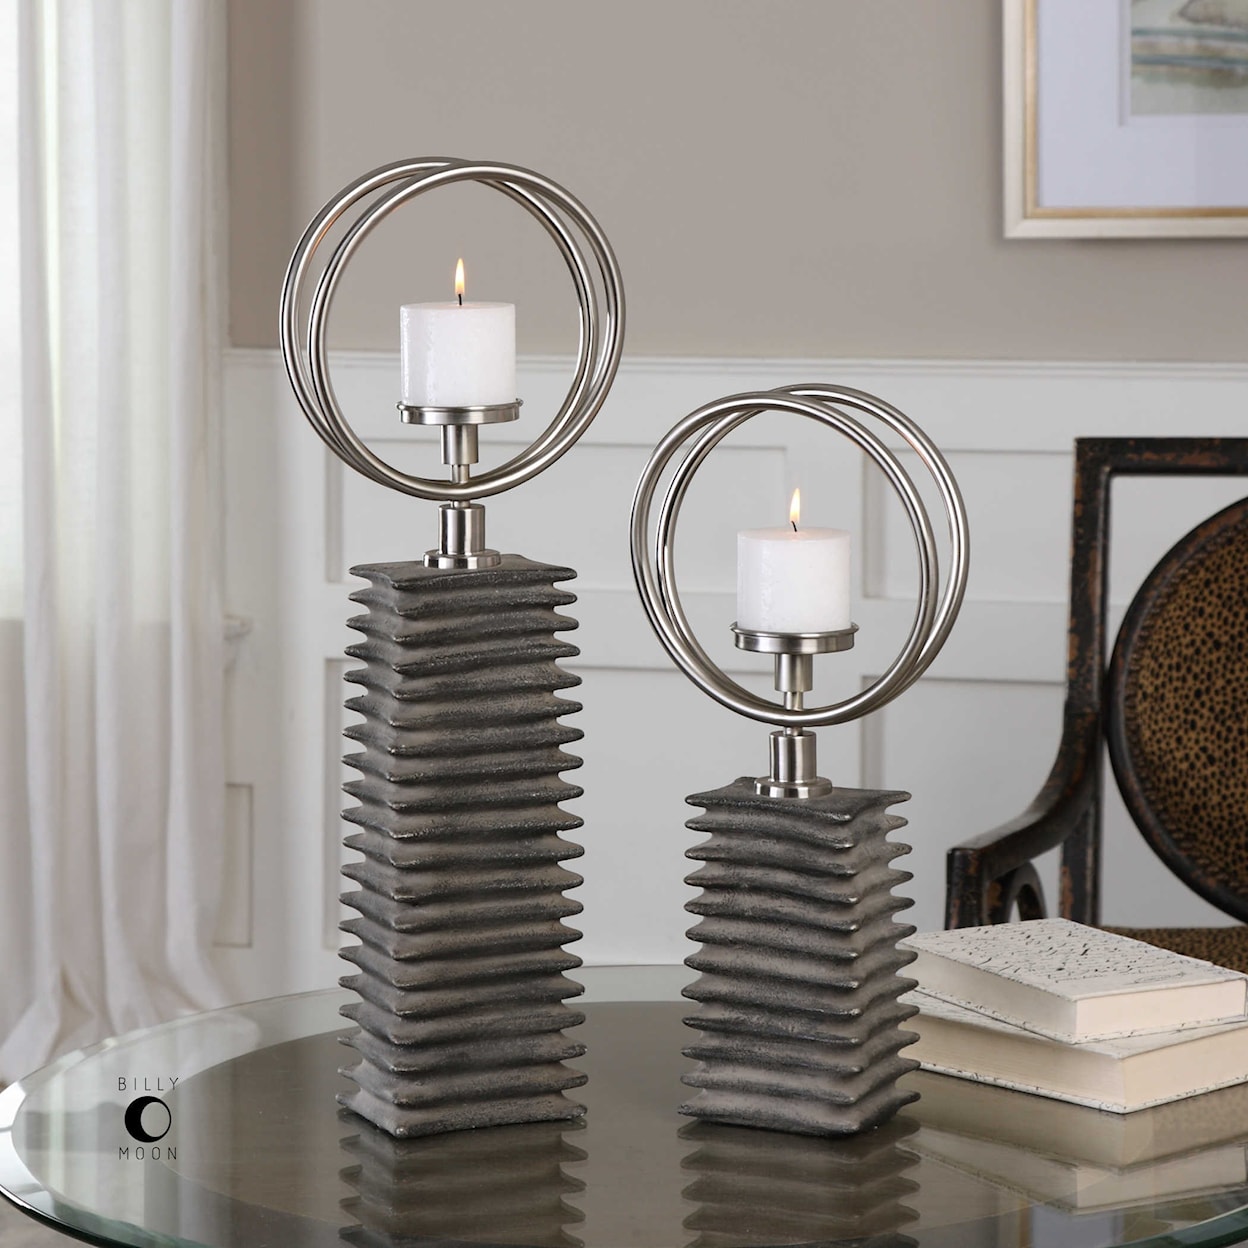 Uttermost Accessories - Candle Holders Eugenio Black Ceramic Candleholders